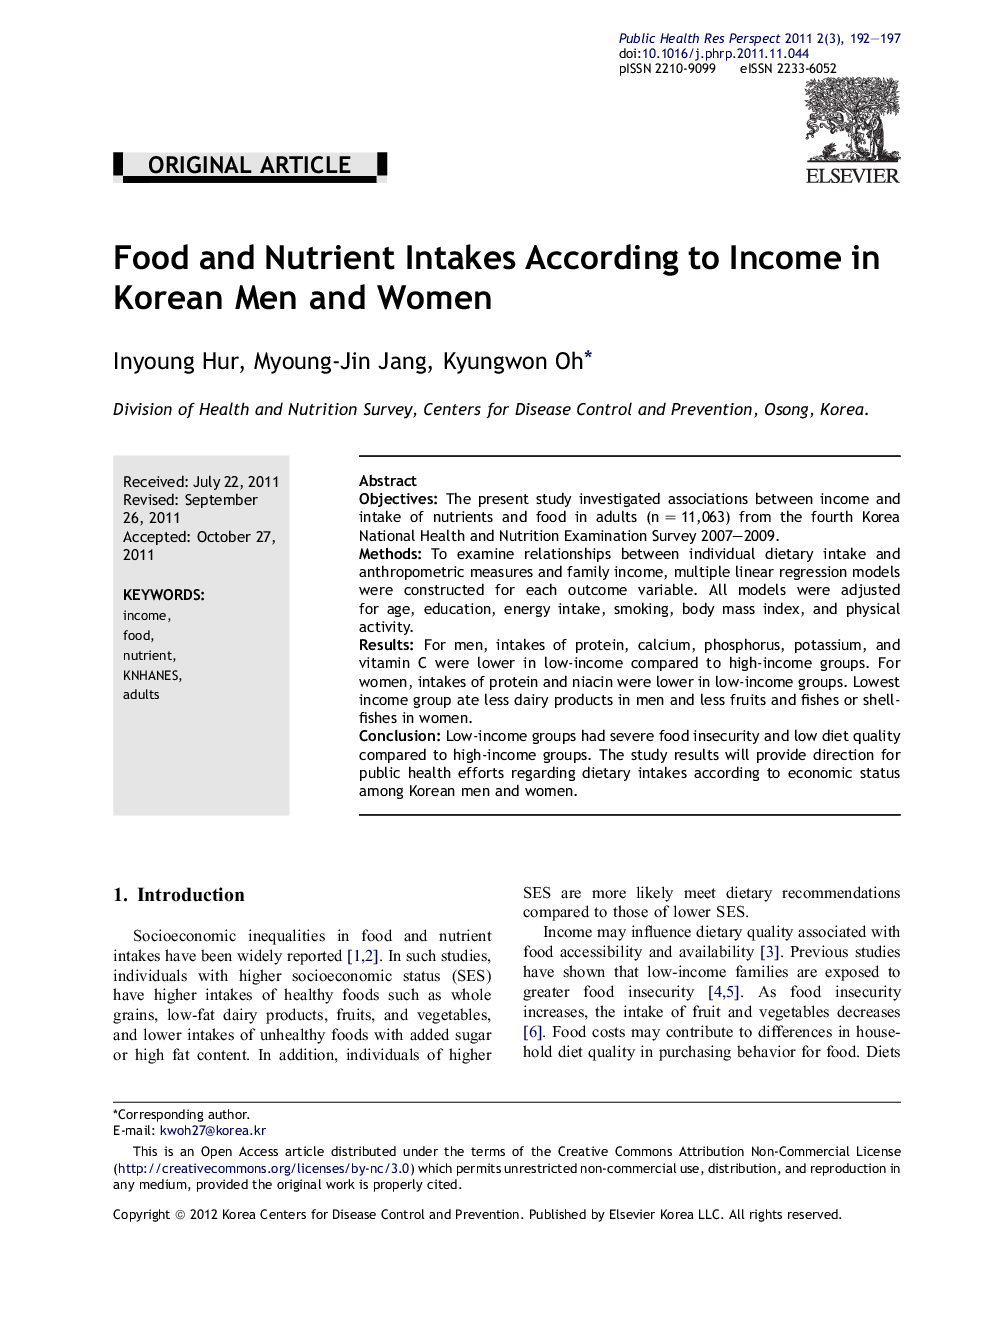 Food and Nutrient Intakes According to Income in Korean Men and Women 